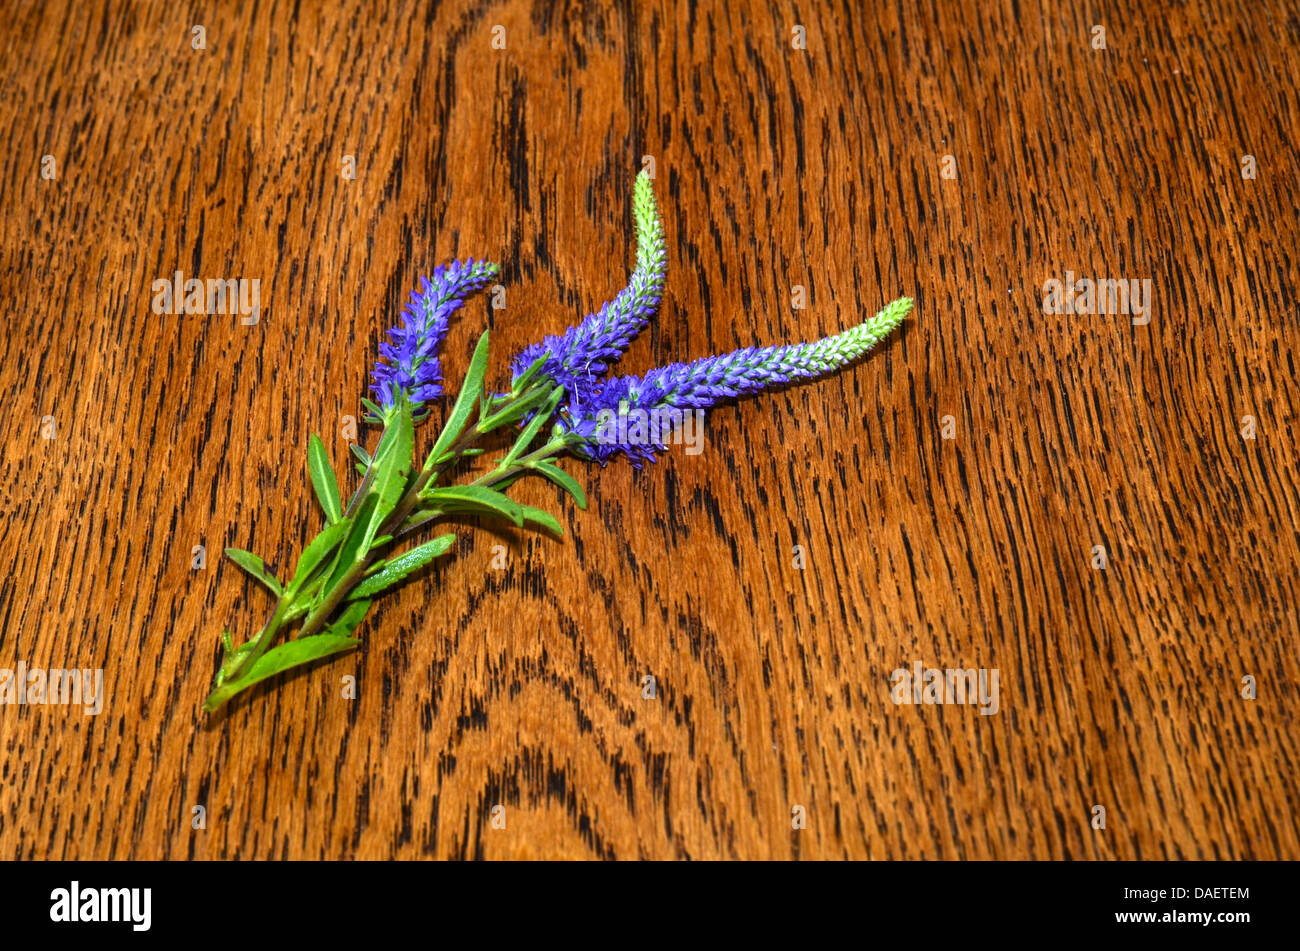 Spiked Speedwell on a wooden table of old oak Stock Photo